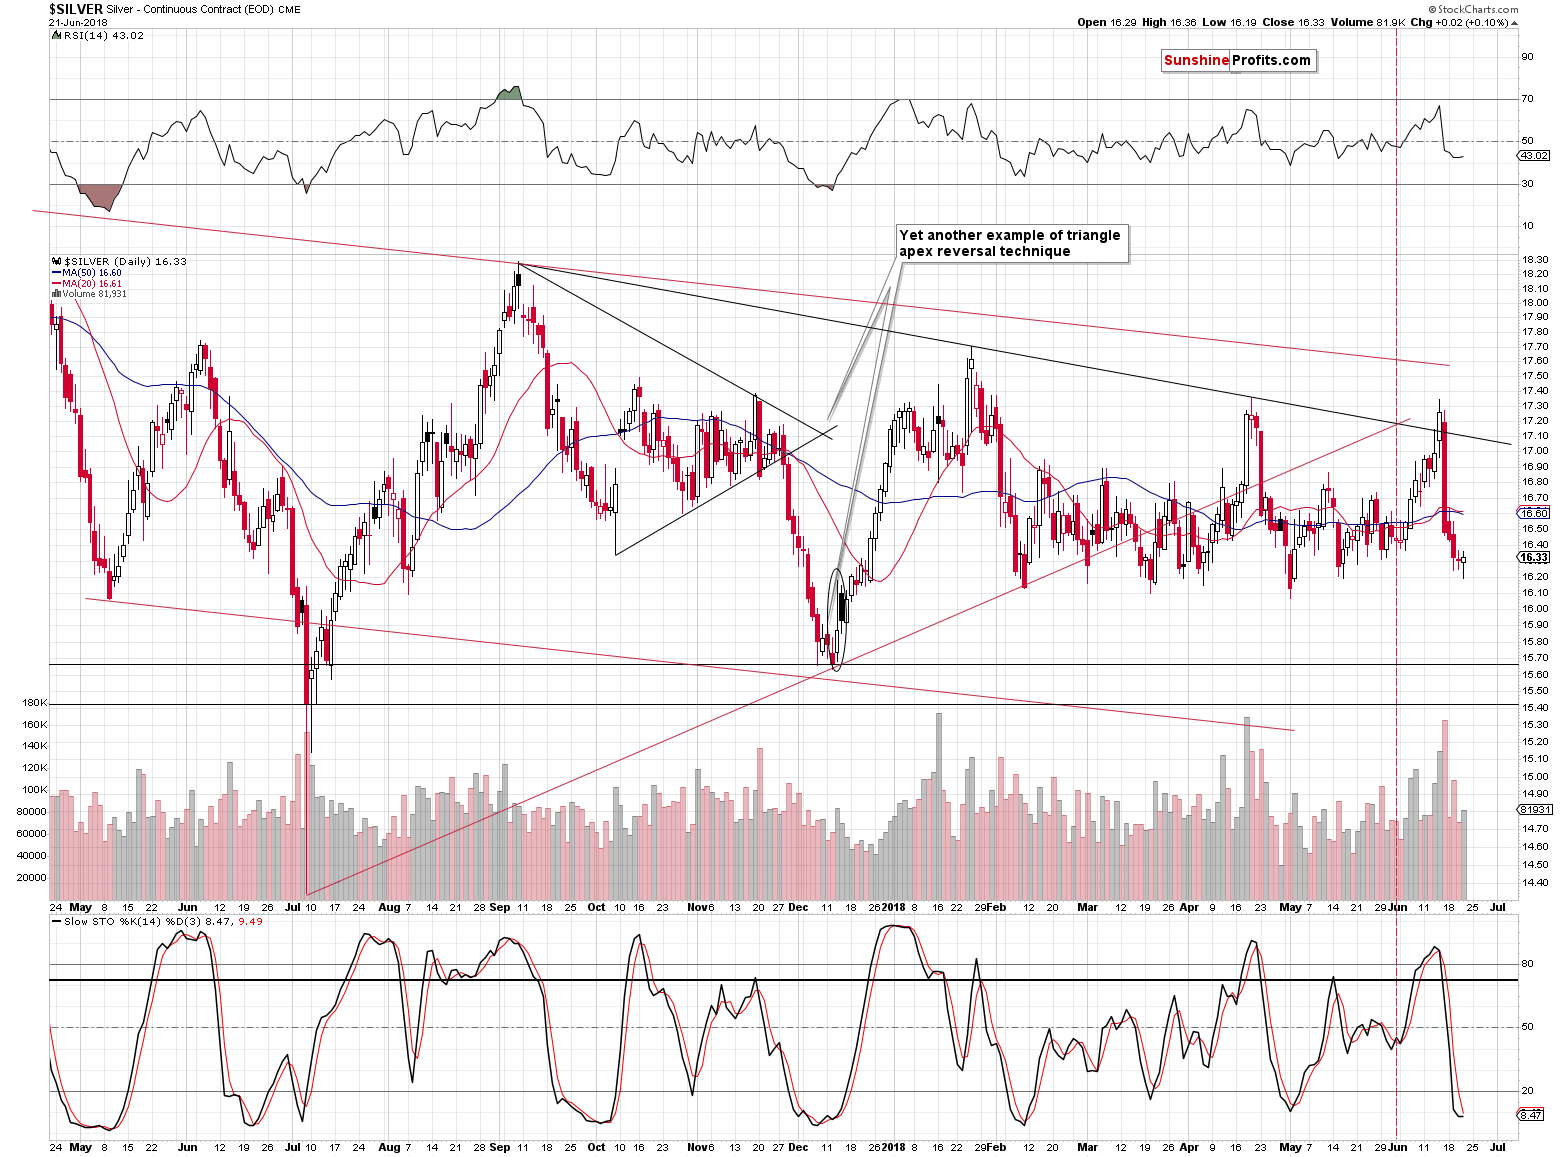 Silver short-term price chart - Silver spot price